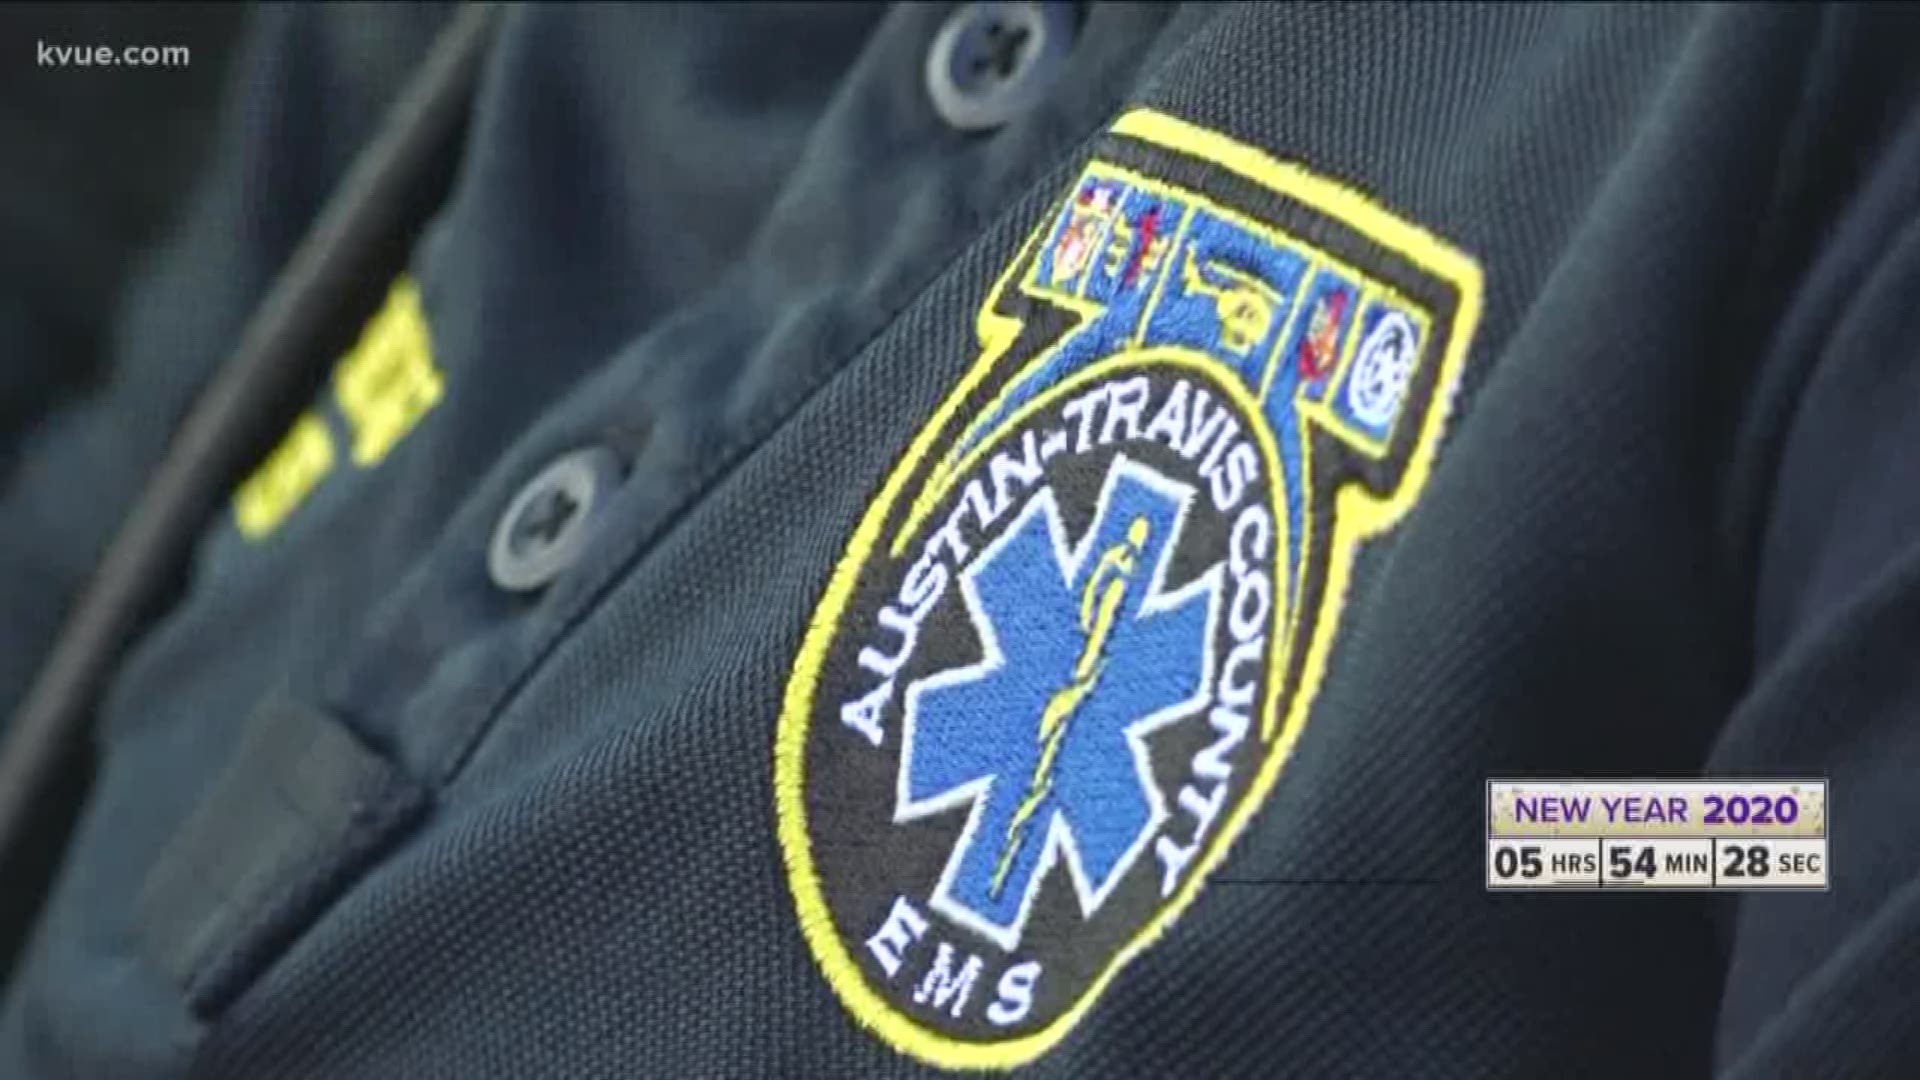 New Year's Eve is the busiest day of the year for paramedics.